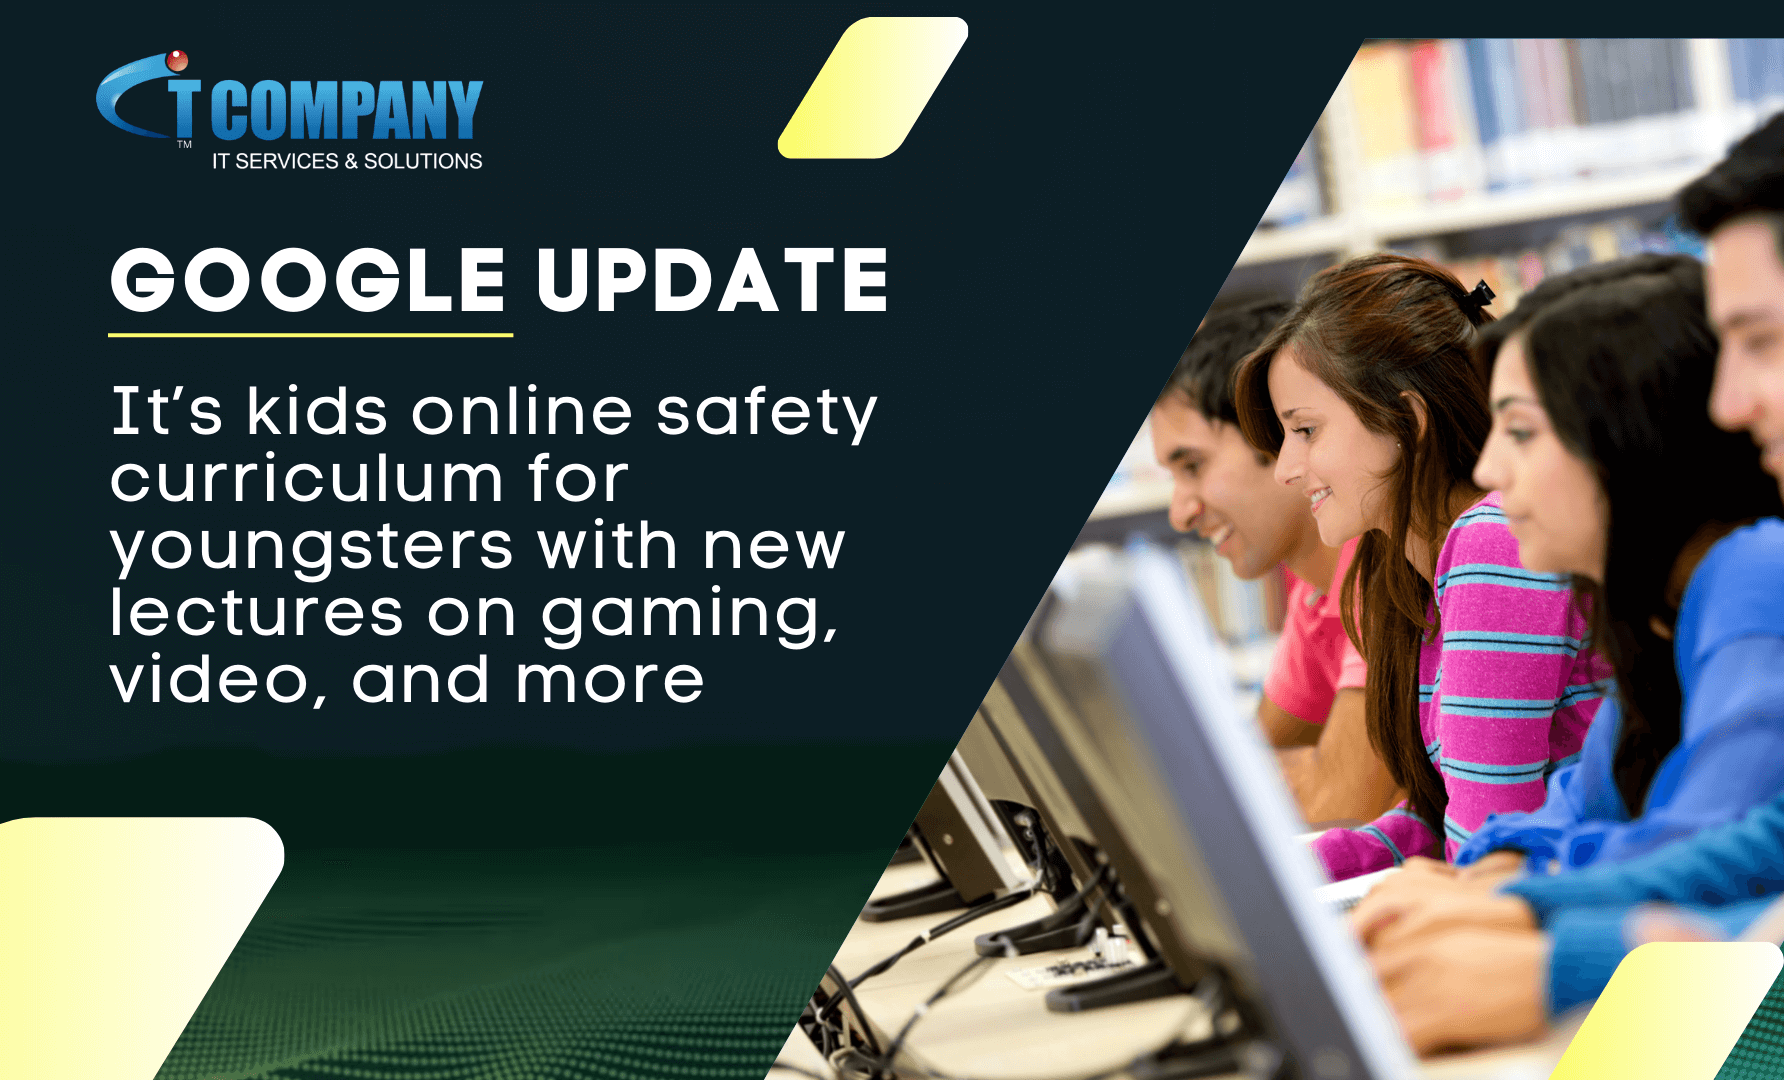 Google has updated its online safety curriculum for youngsters with new lectures on gaming, video, and other topics